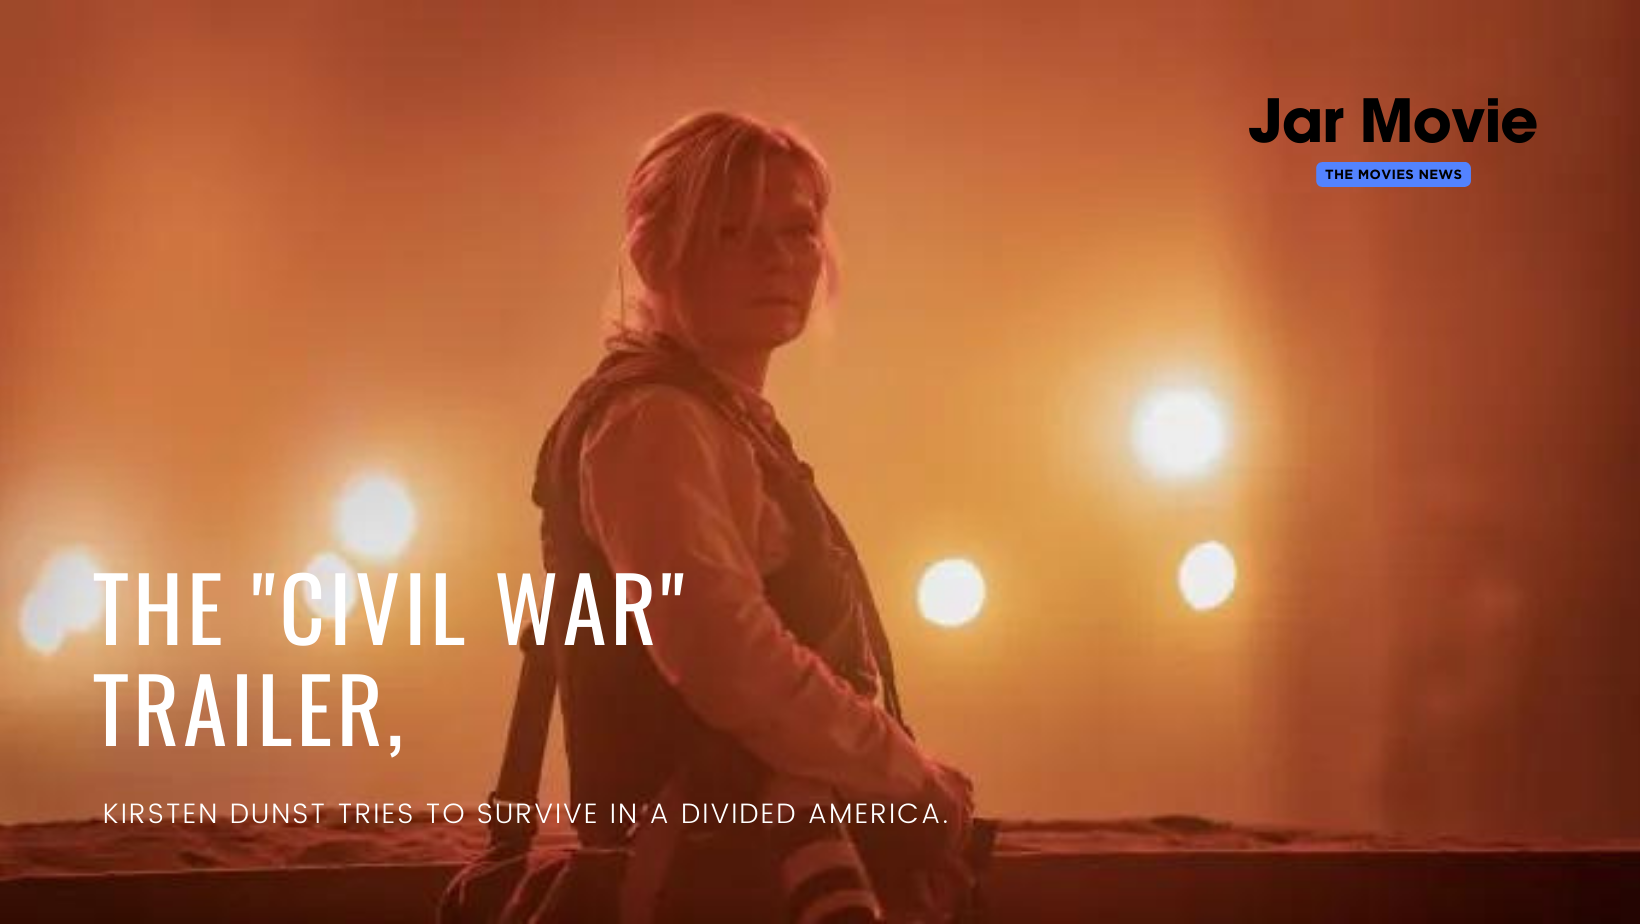 In the Civil War trailer, Kirsten Dunst tries to survive in a divided America